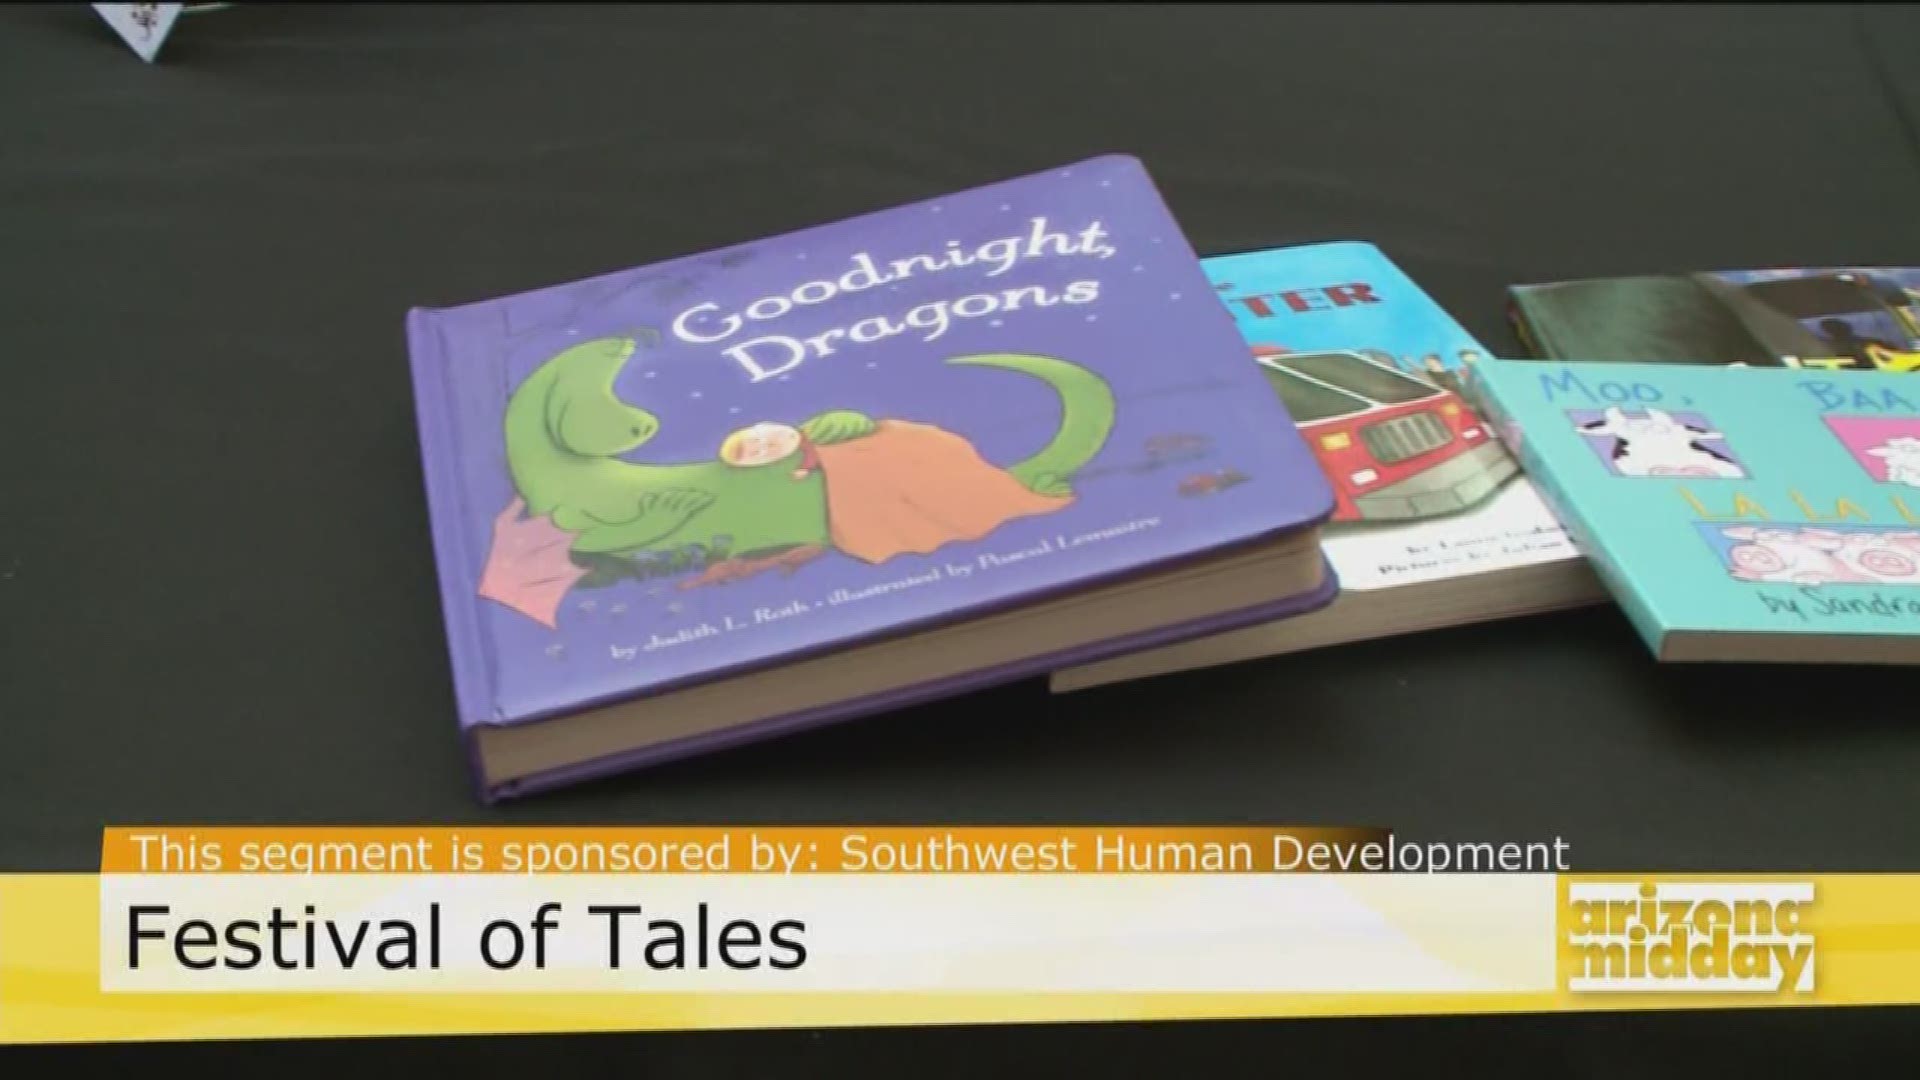 Jake Adams with Southwest Human Development gives us the scoop on the Festival of Tales and how the kids can take home free books